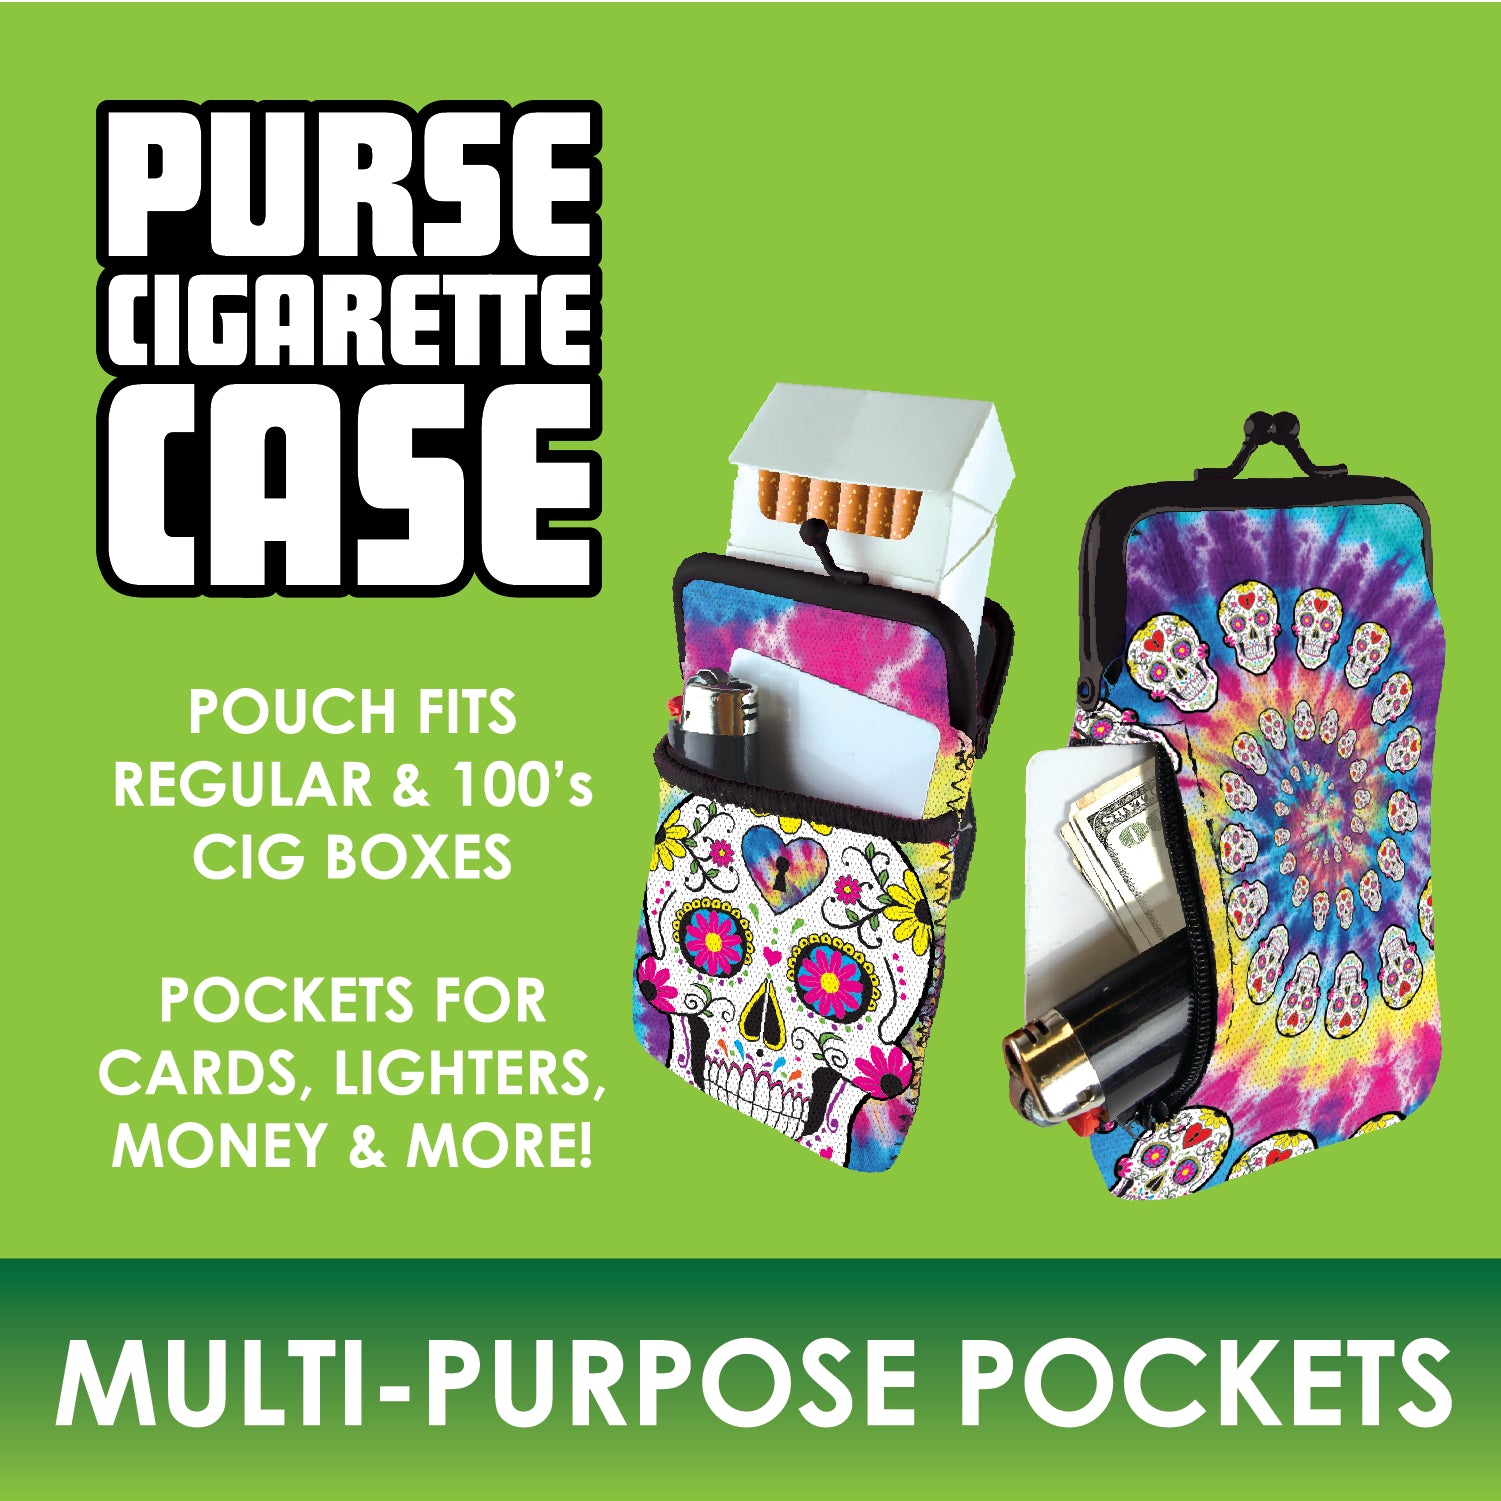 Cigarette Case for Women 100s Tampon Holder Change Purse with Zip Pocket  DOES WINE COUNT AS FRUIT - Walmart.com